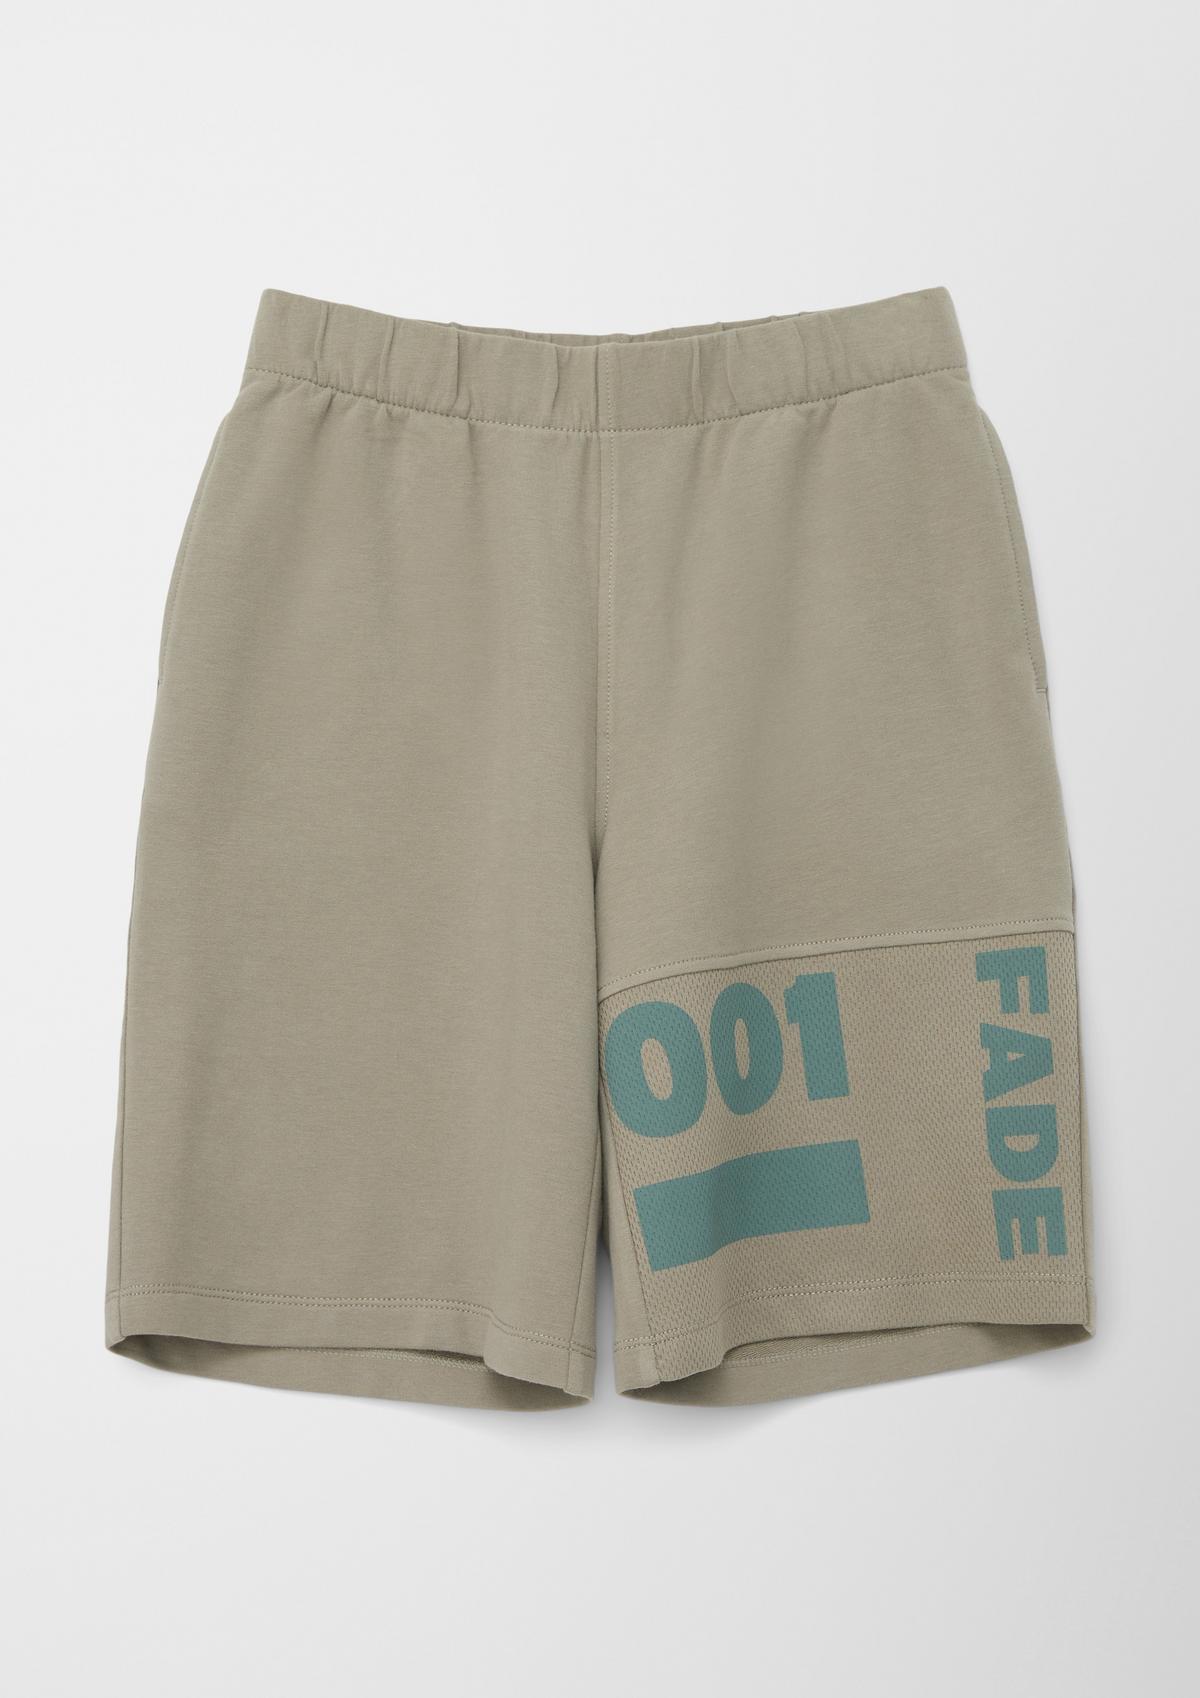 online for teens Bermuda Find and boys shorts